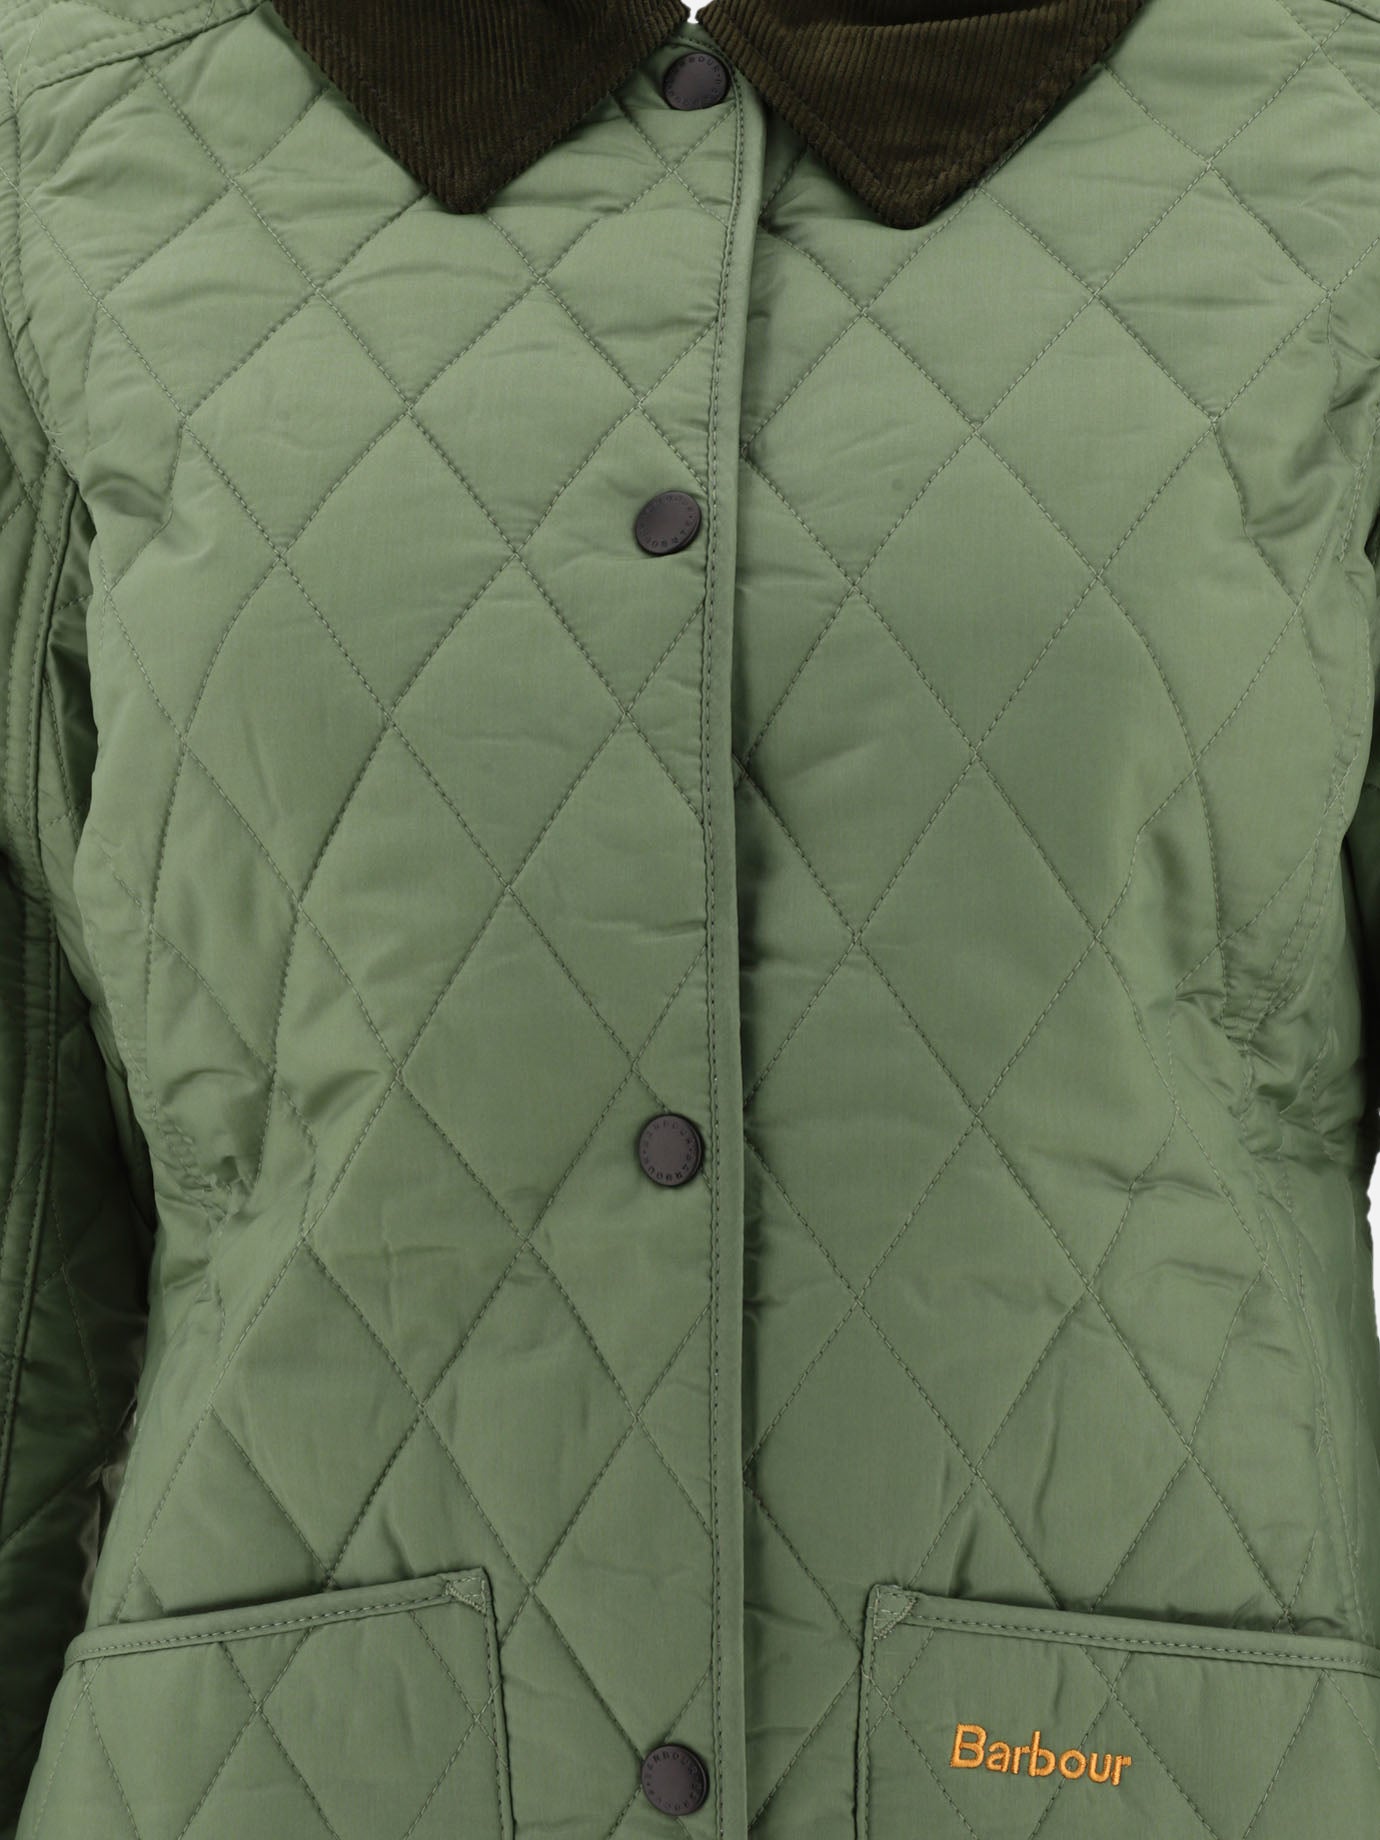 "Annandale" quilted jacket